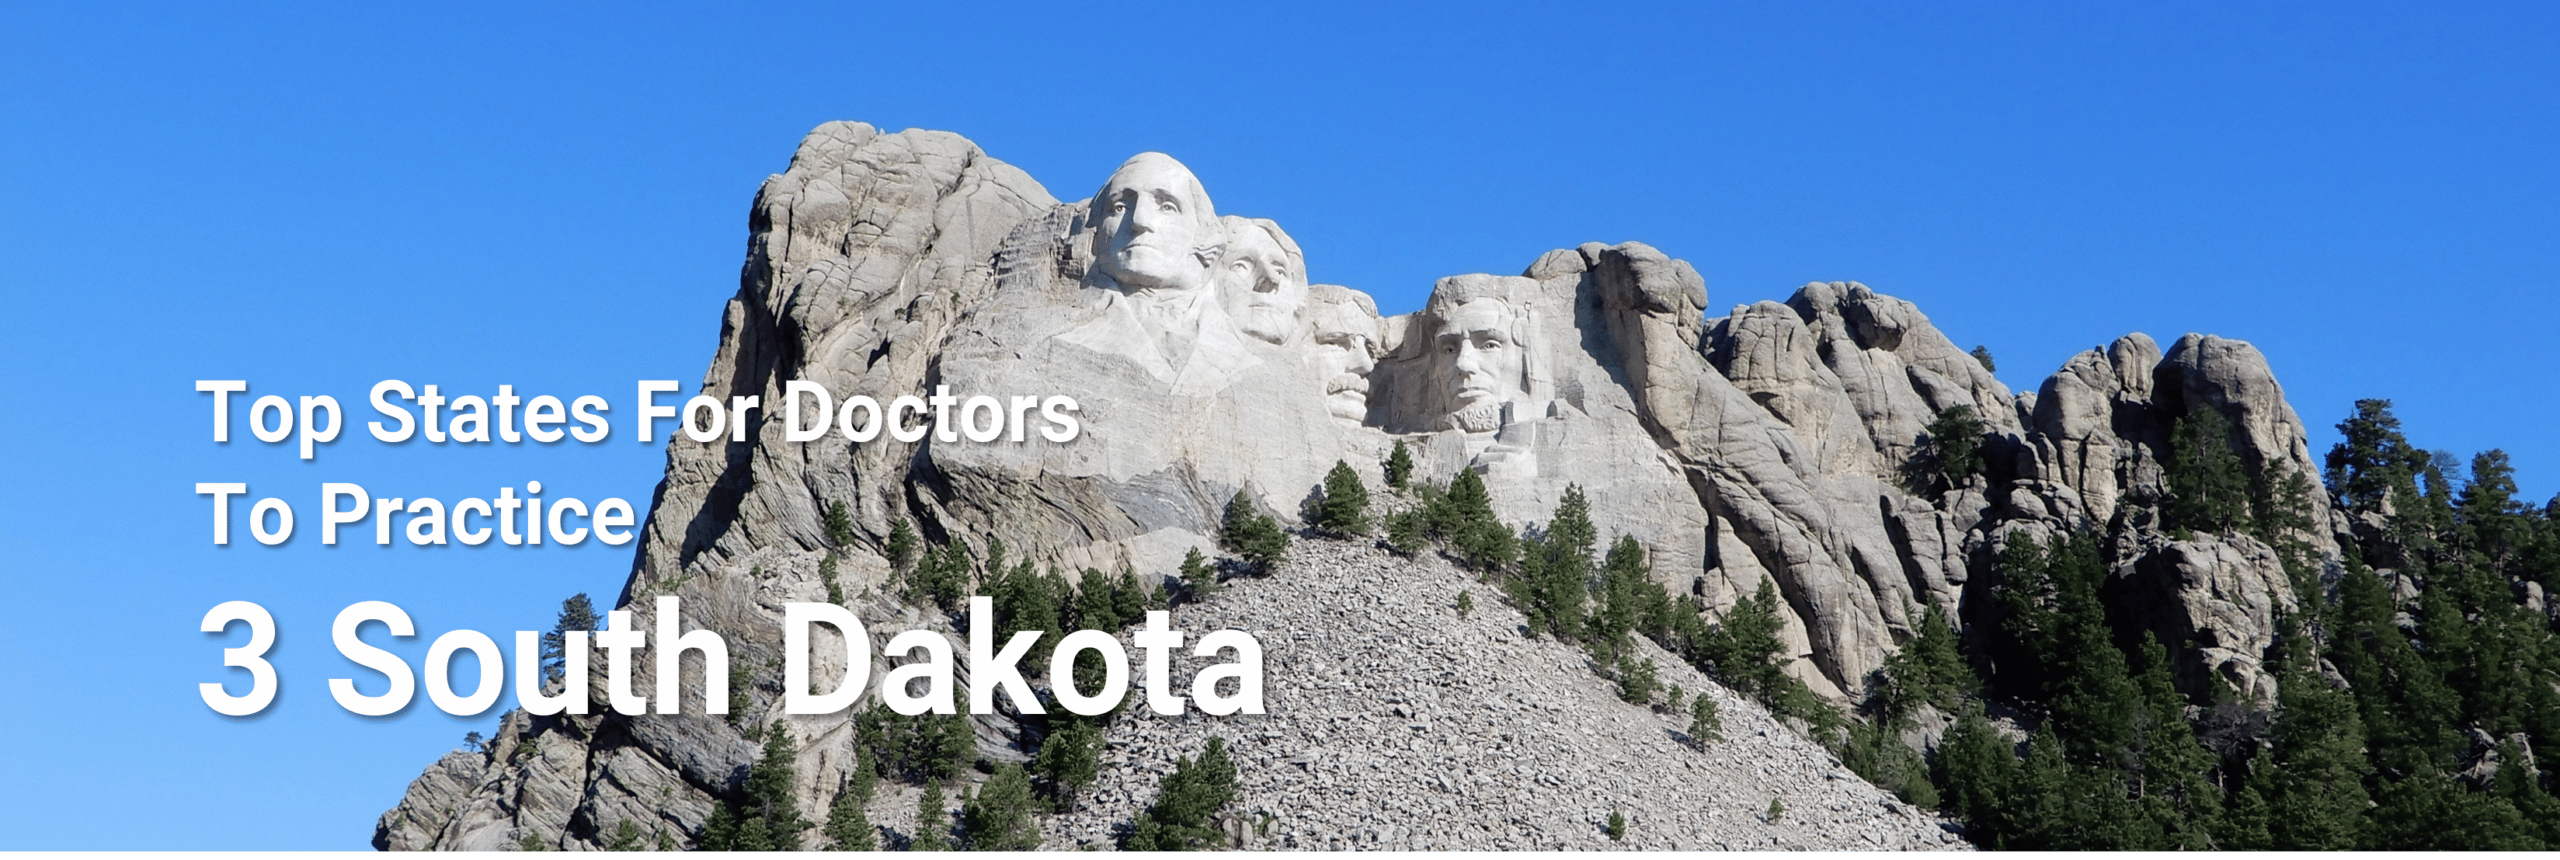 Top States for Doctors to Practice 3 South Dakota